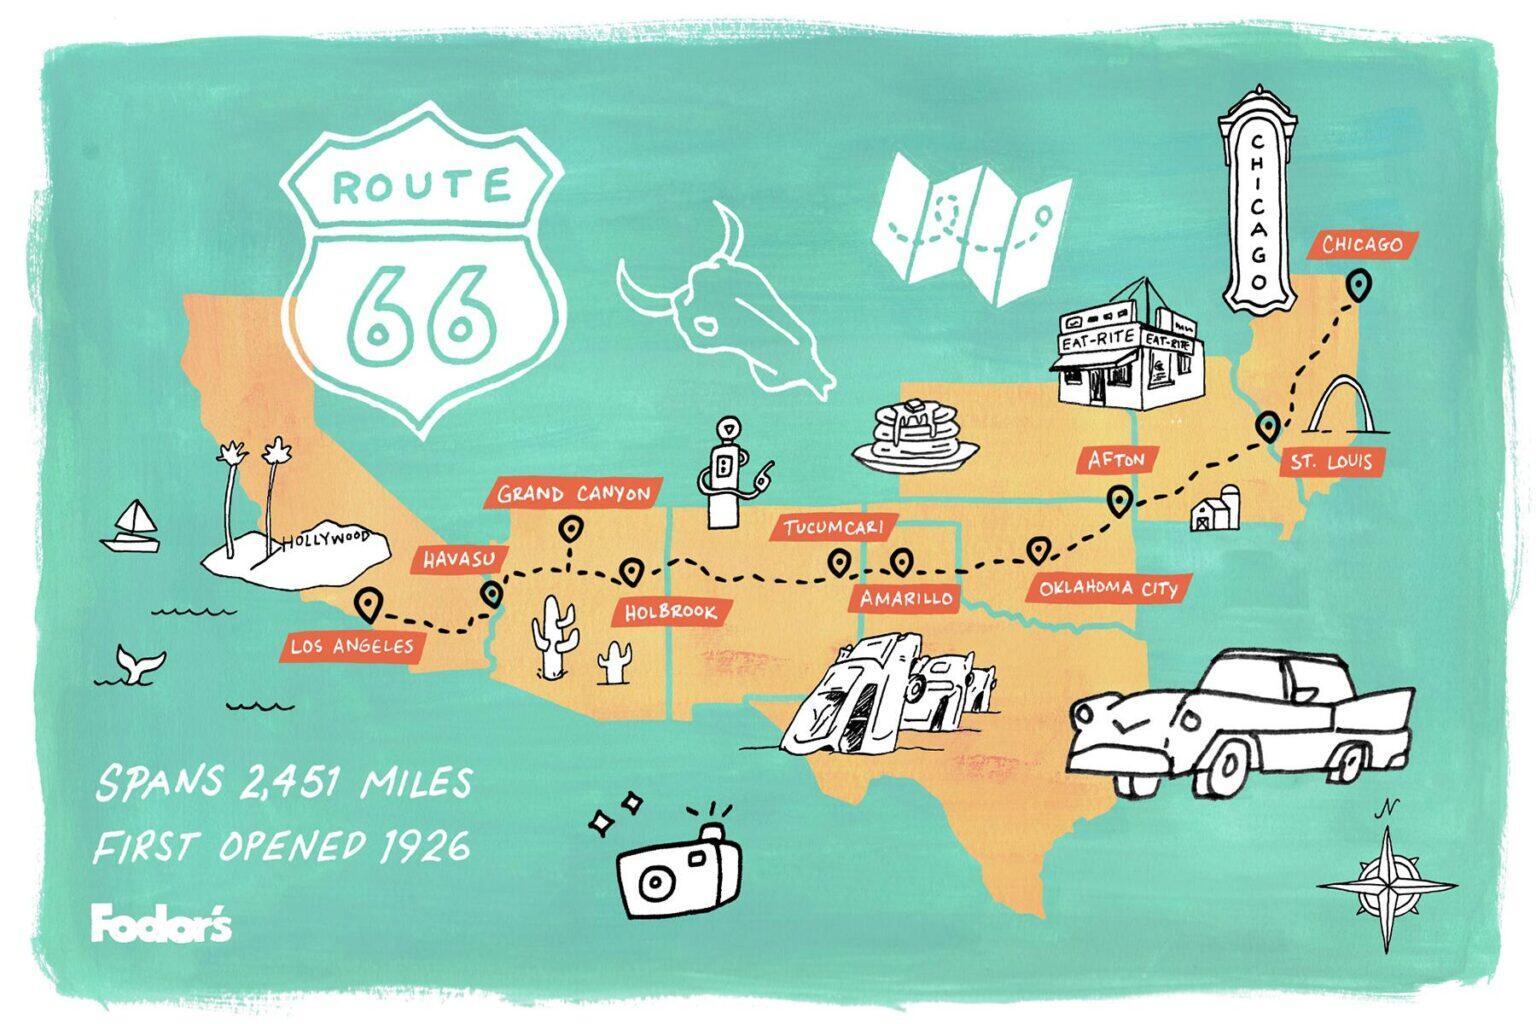 travel guide route 66